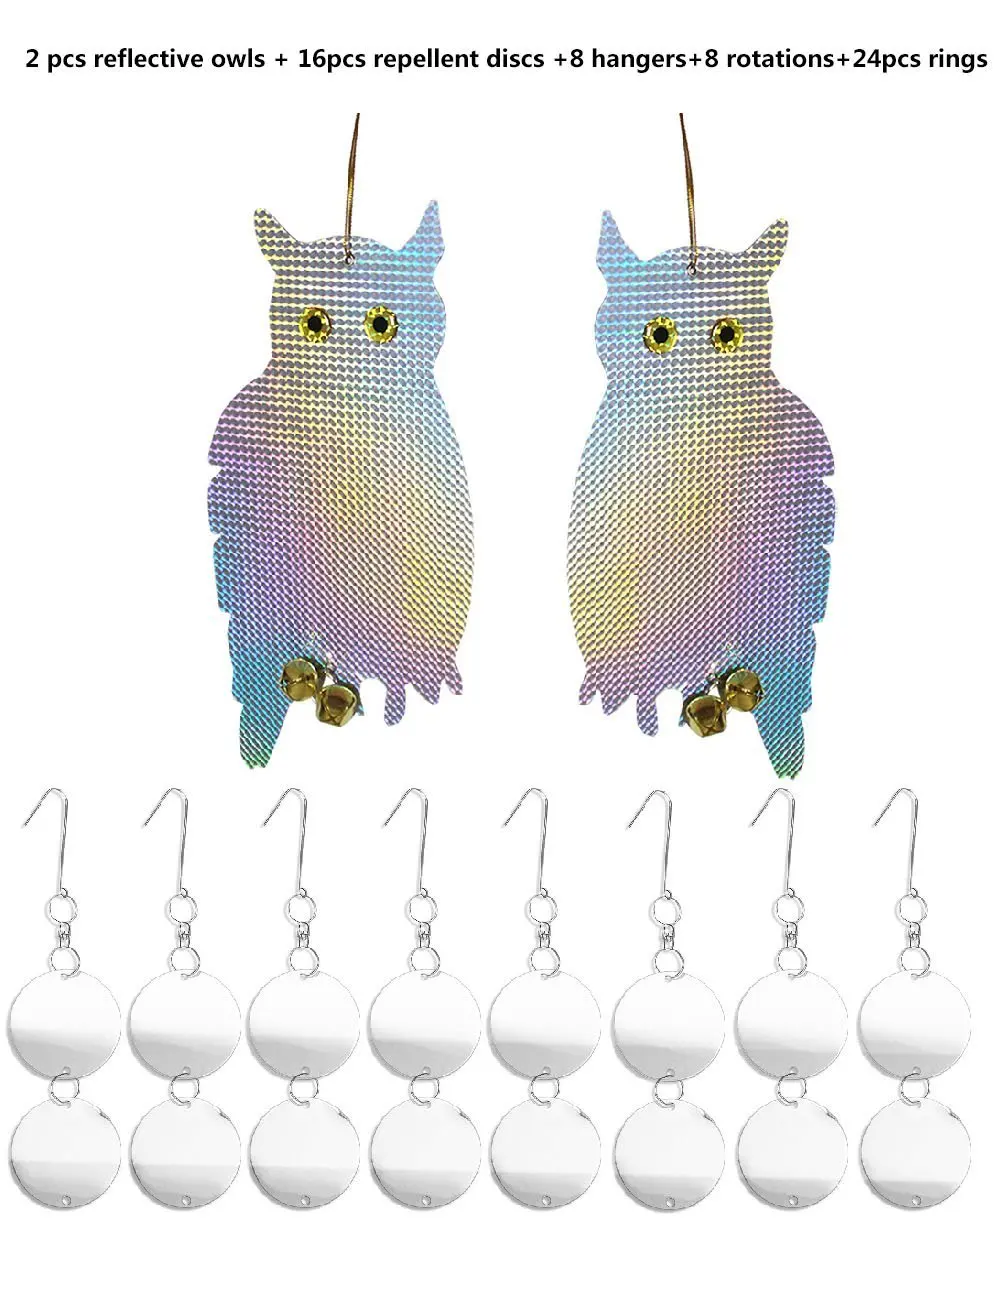 Buy 2PCS Fake Reflective Owl Bird Scare Repellent Device Hanging